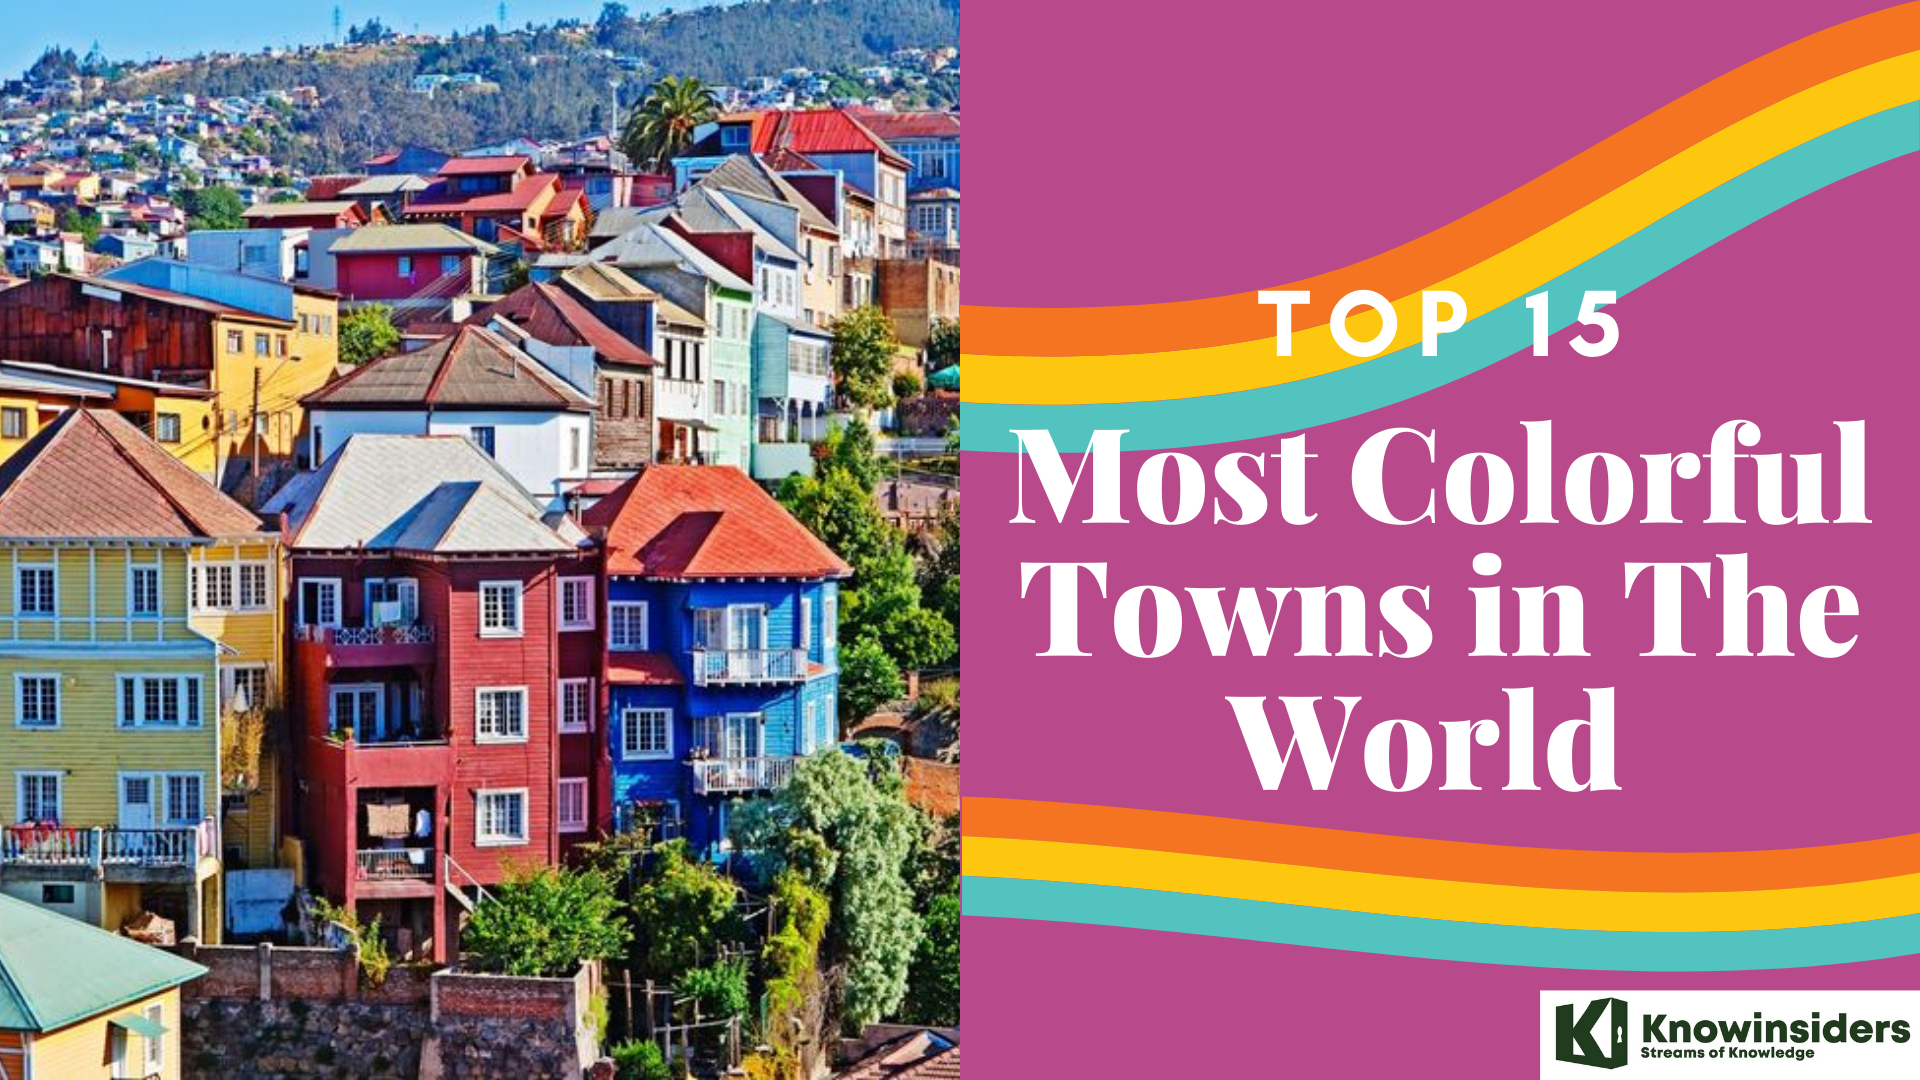 Top 15 most colorful towns in the world 